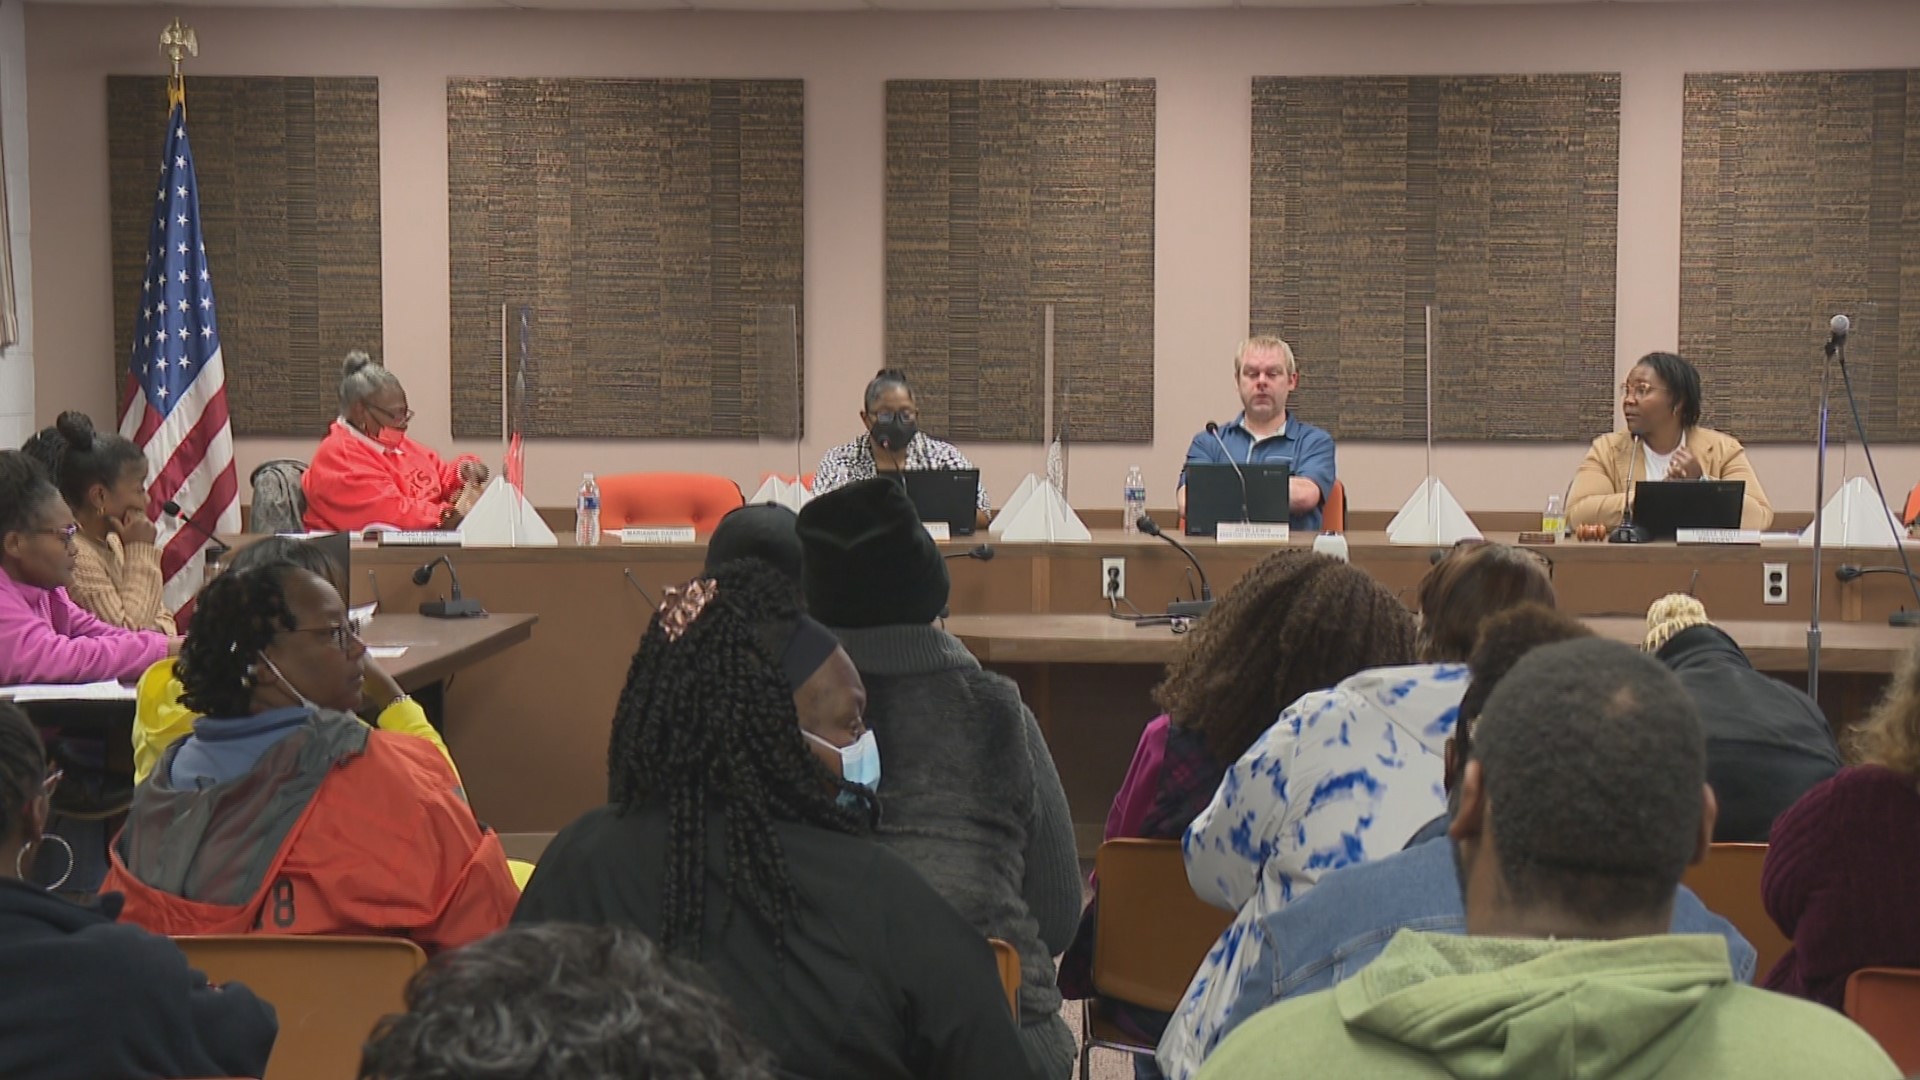 Three Muskegon County leaders said that the recall petitions did not have clear or factual language and was ultimately rejected.